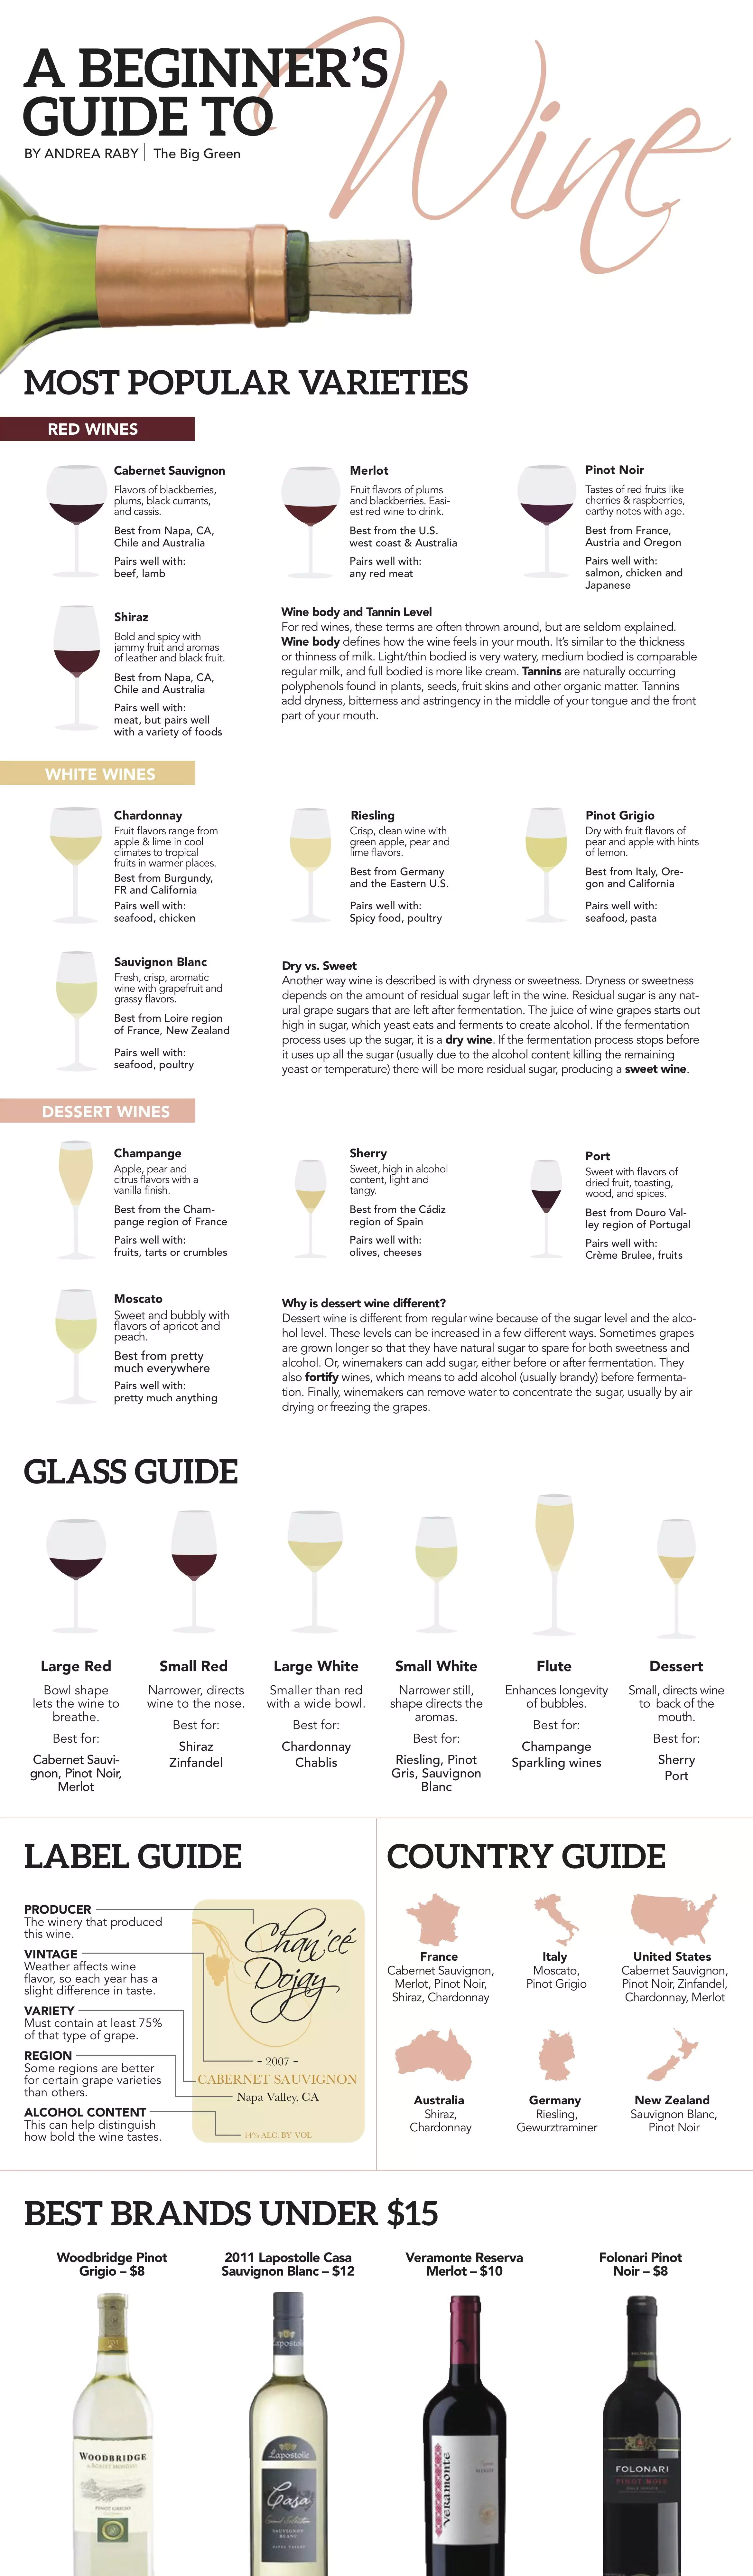 A Beginner's Guide To Wine